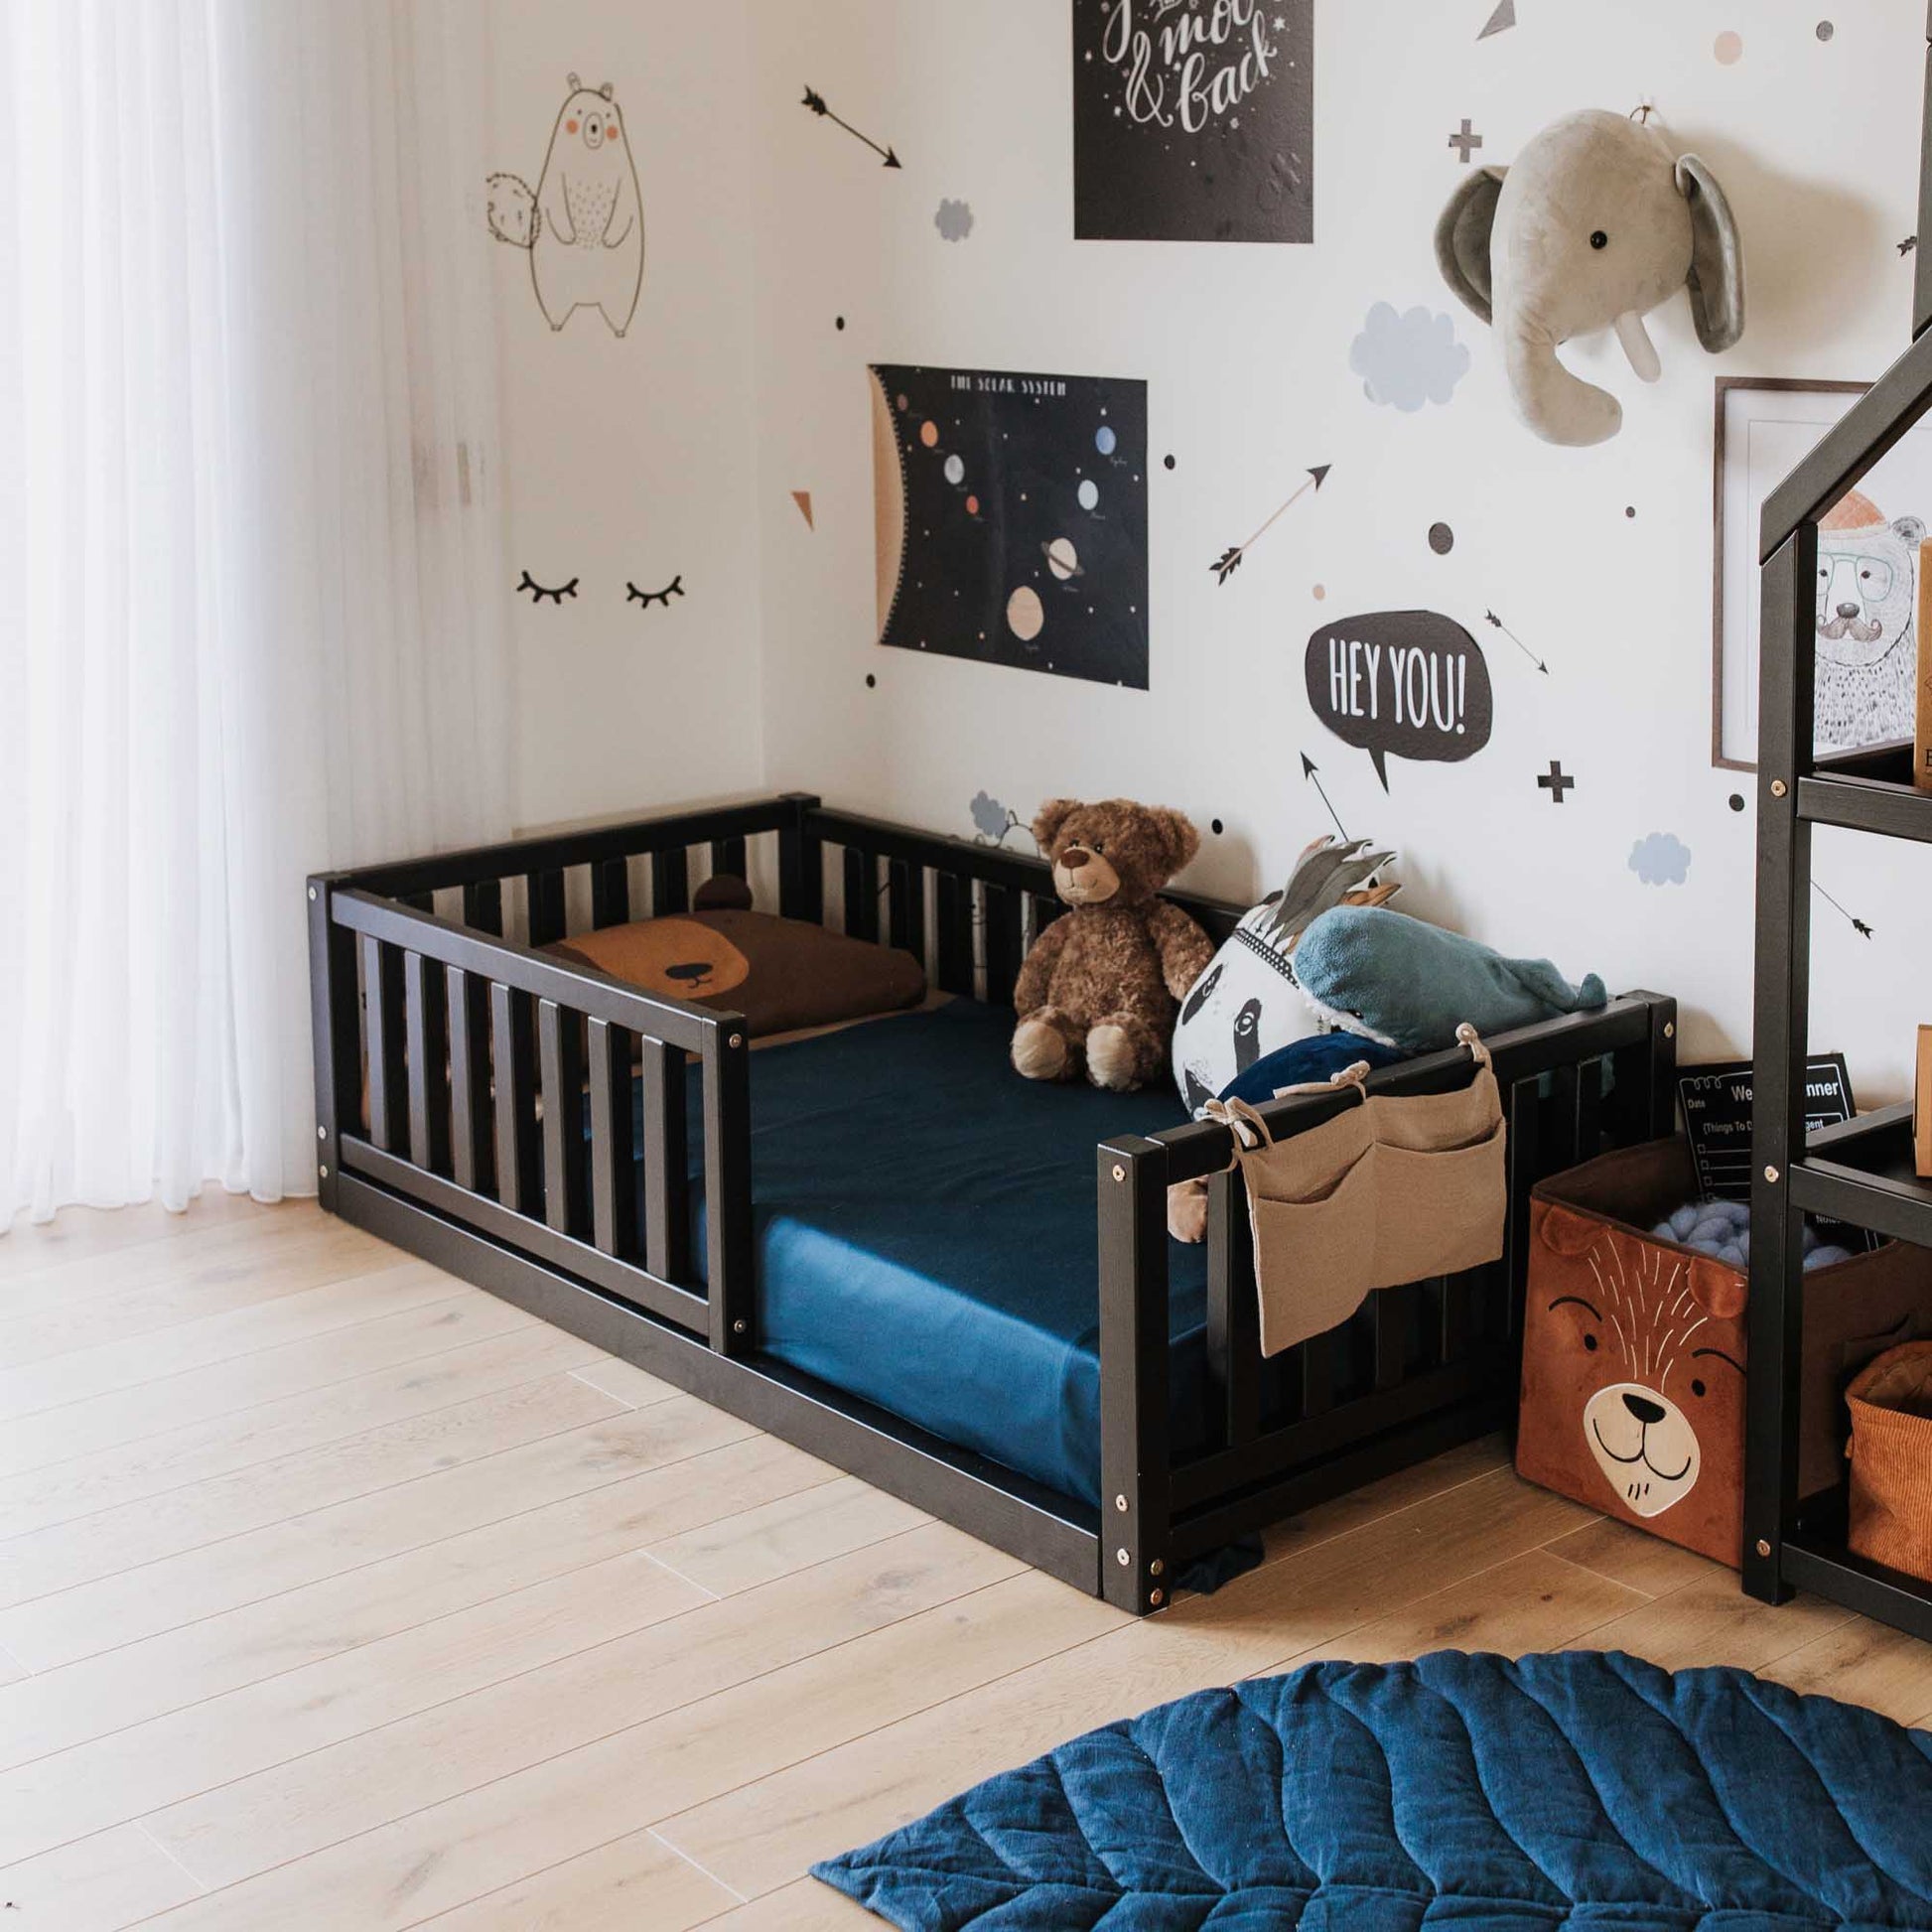 A long-lasting Sweet Home From Wood children's room with teddy bears and stuffed animals, featuring a 2-in-1 toddler bed on legs with a vertical rail fence.